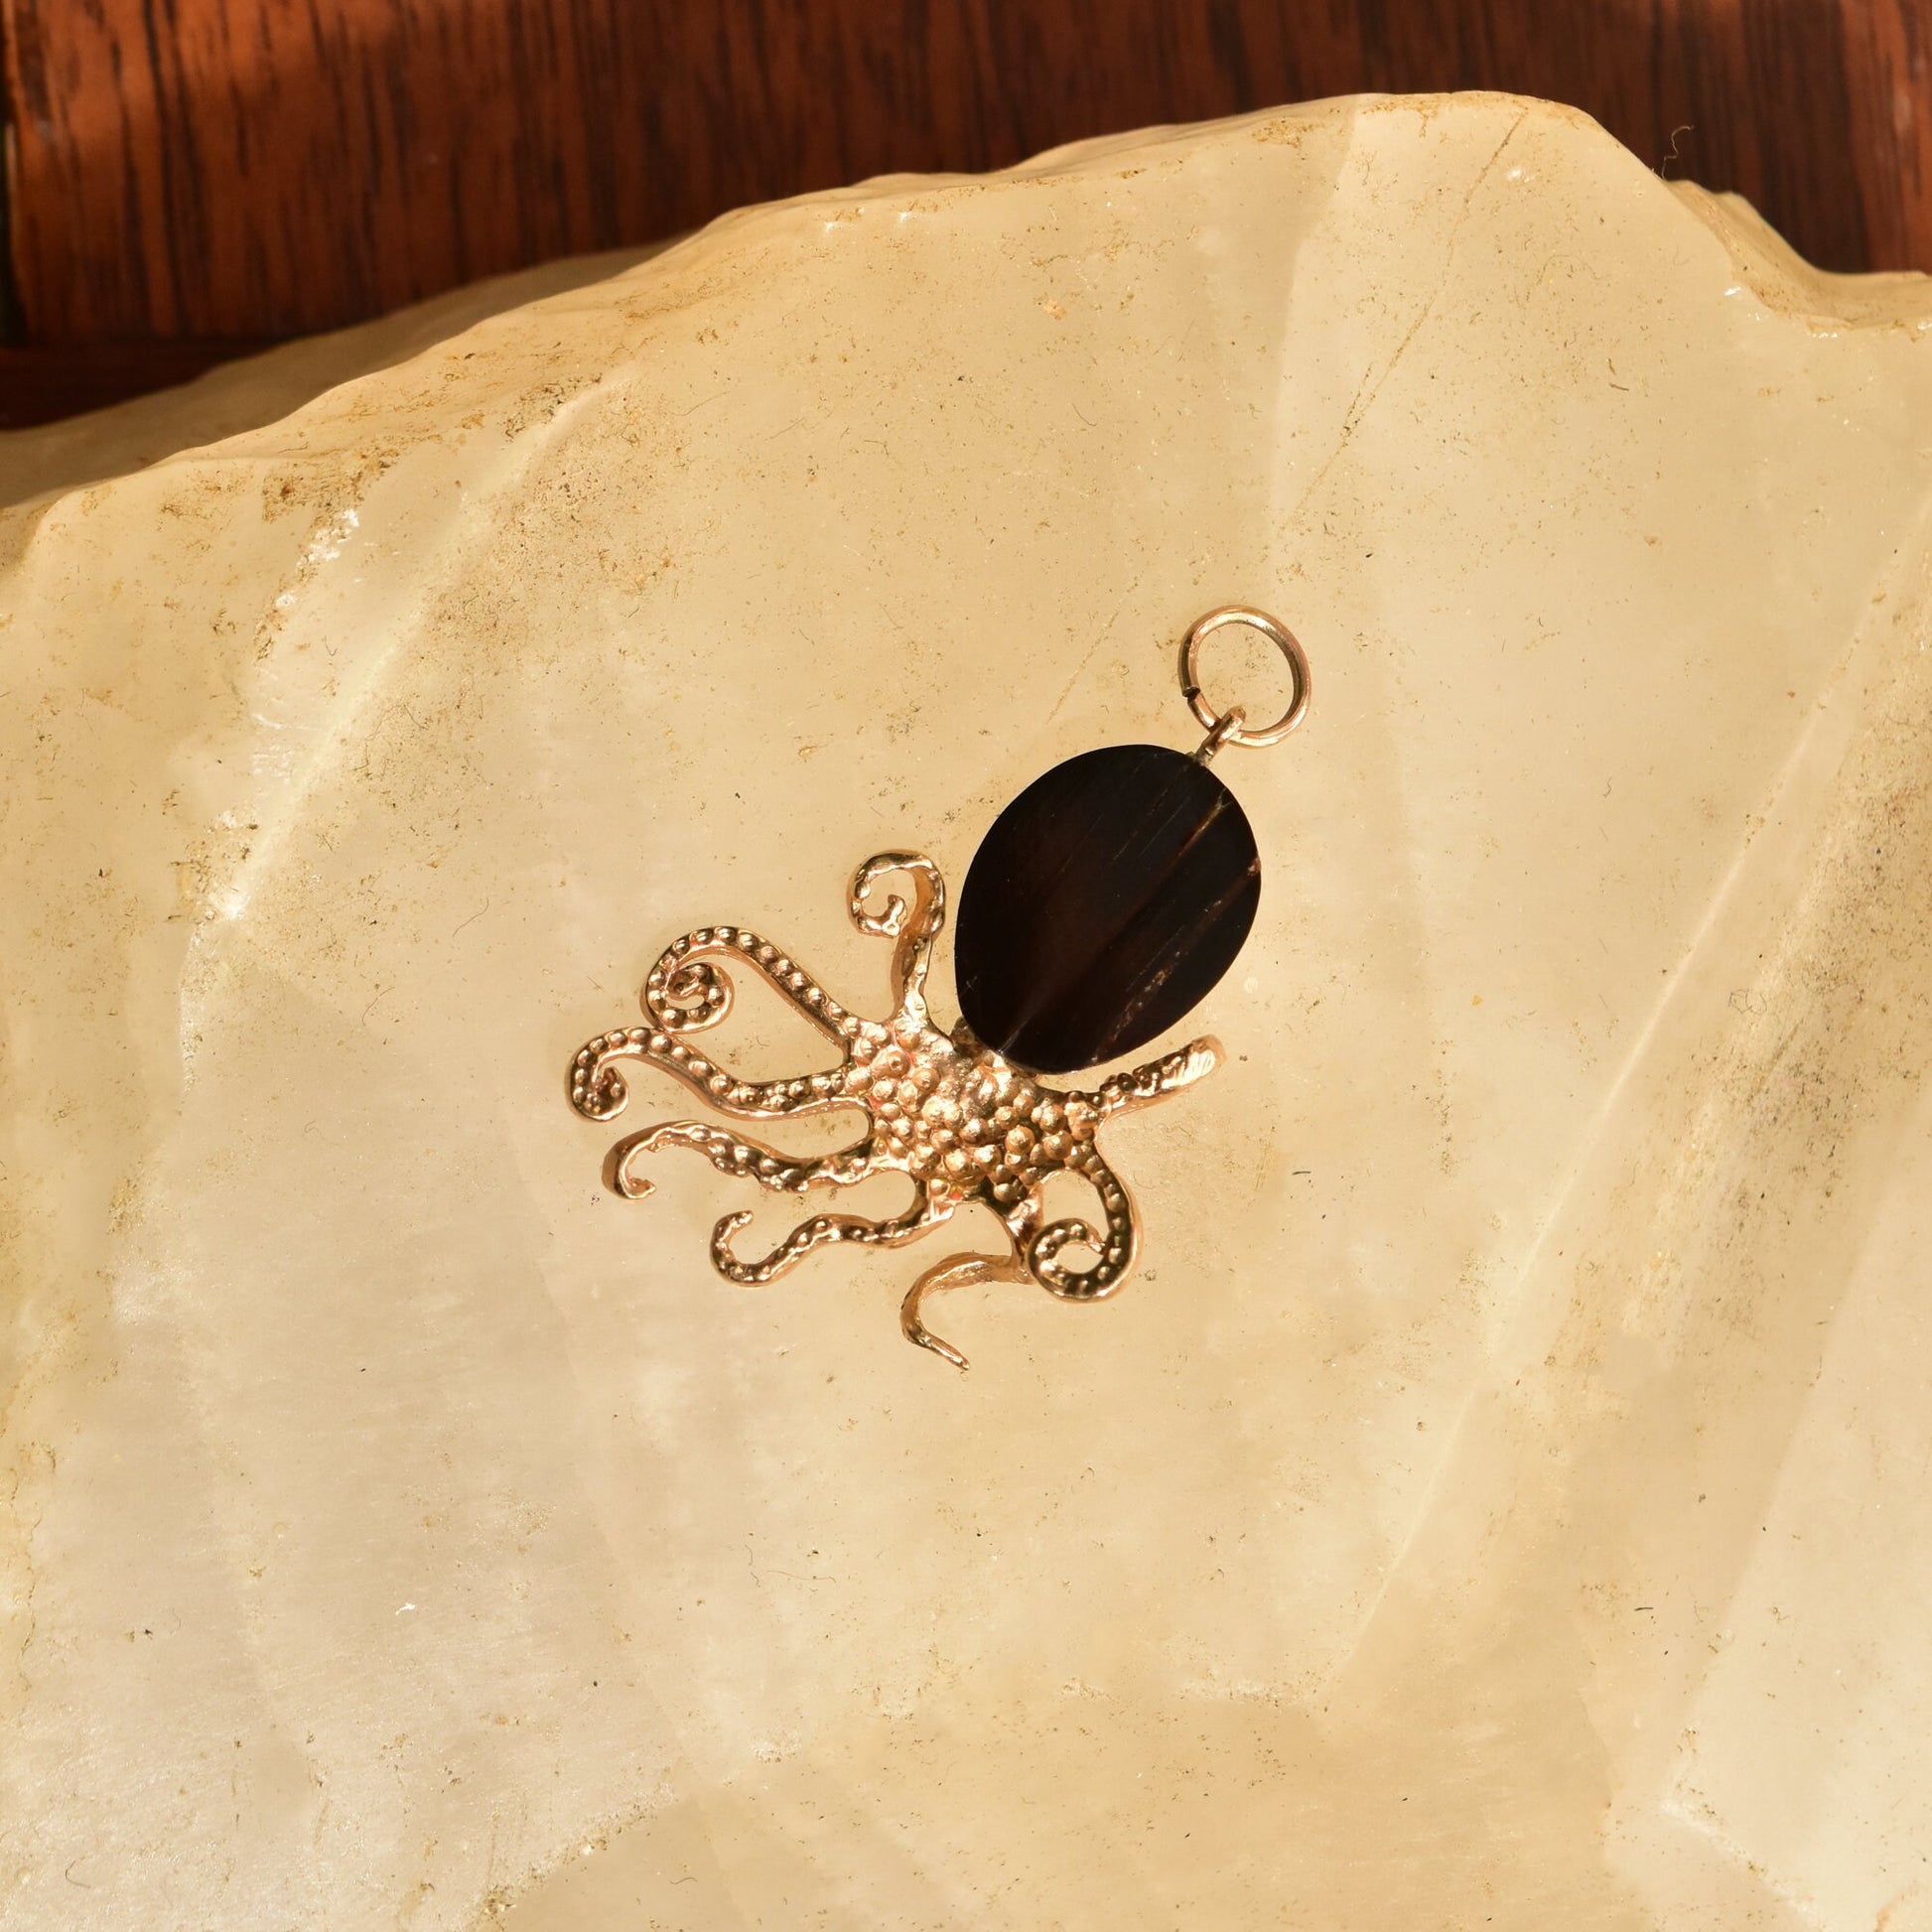 10K yellow gold octopus pendant featuring a black coral diamond eye, 3D design, aquatic jewelry theme, measuring 38mm in size.